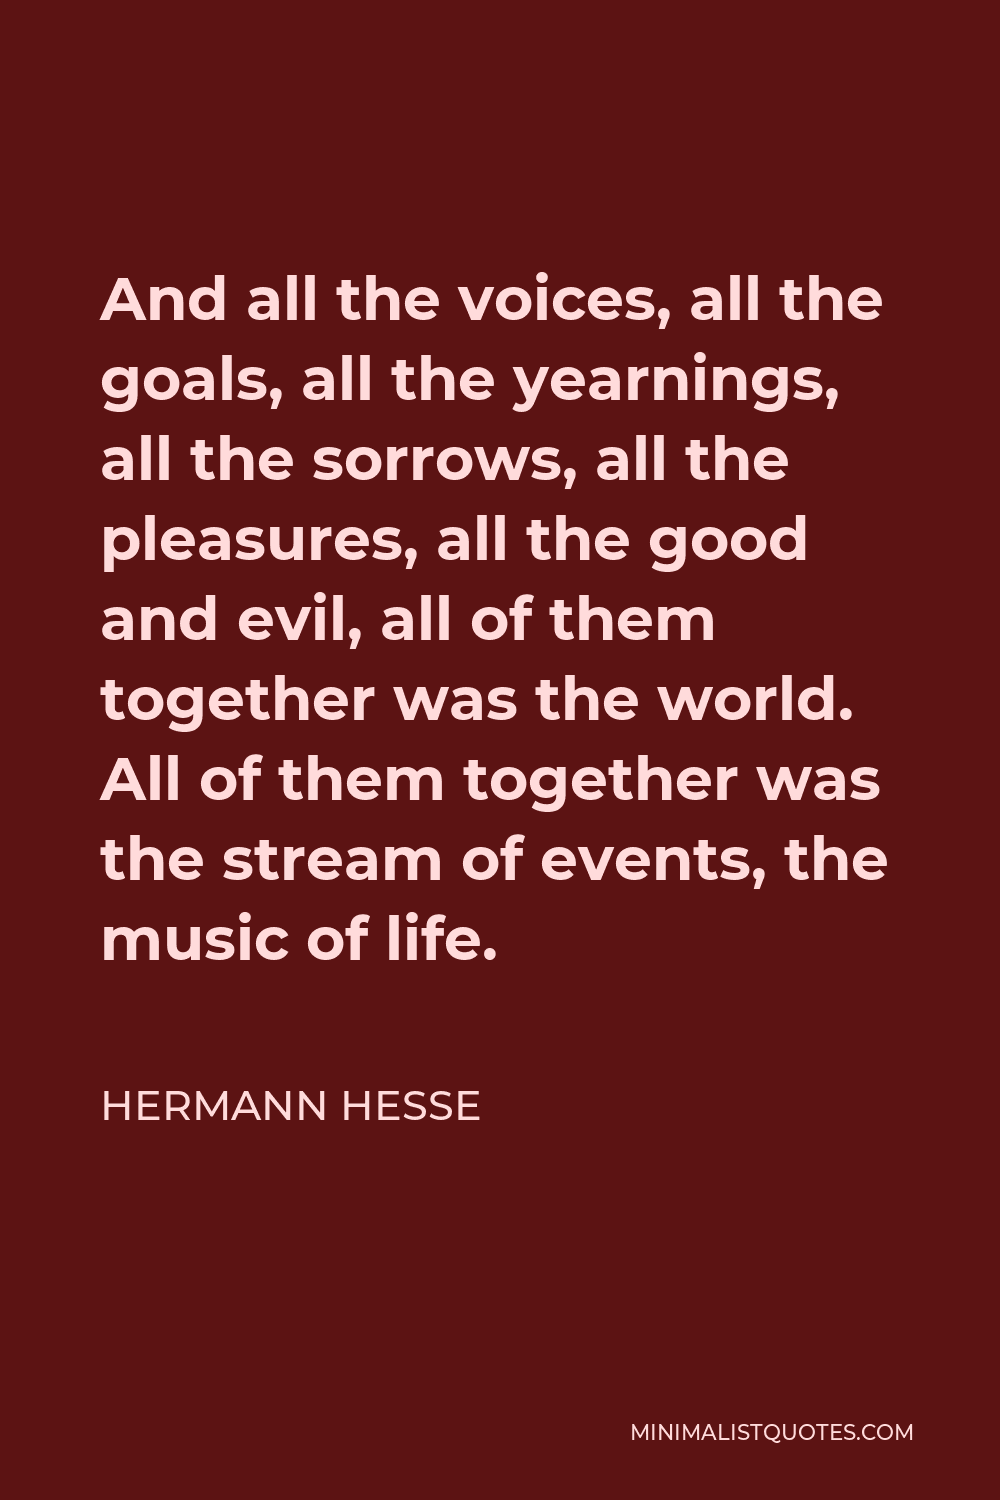 Hermann Hesse Quote - And all the voices, all the goals, all the yearnings, all the sorrows, all the pleasures, all the good and evil, all of them together was the world. All of them together was the stream of events, the music of life.